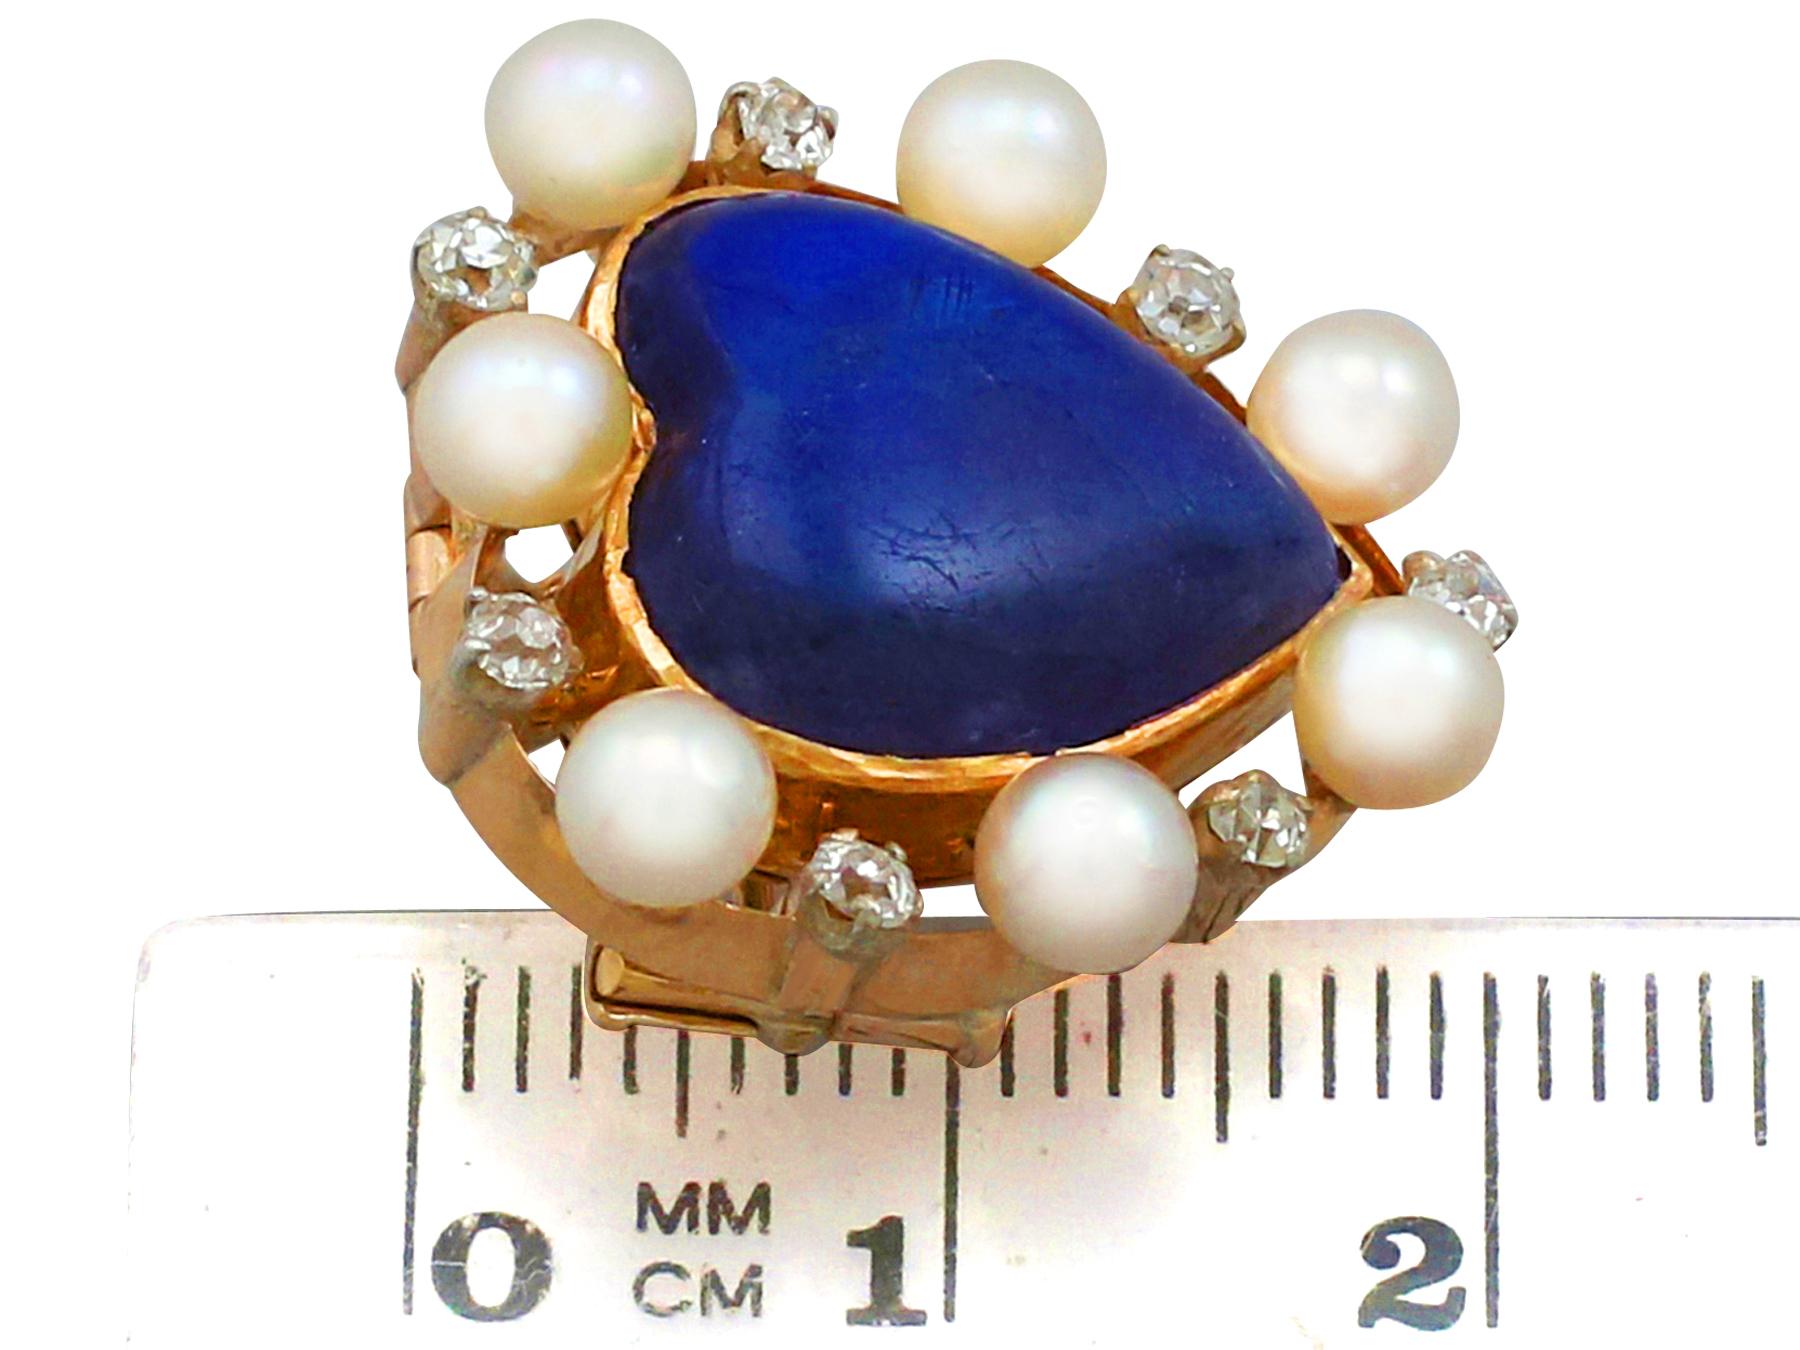 Antique 3.98Ct Cabochon Cut Labradorite and Seed Pearl Diamond and Gold Brooch For Sale 1